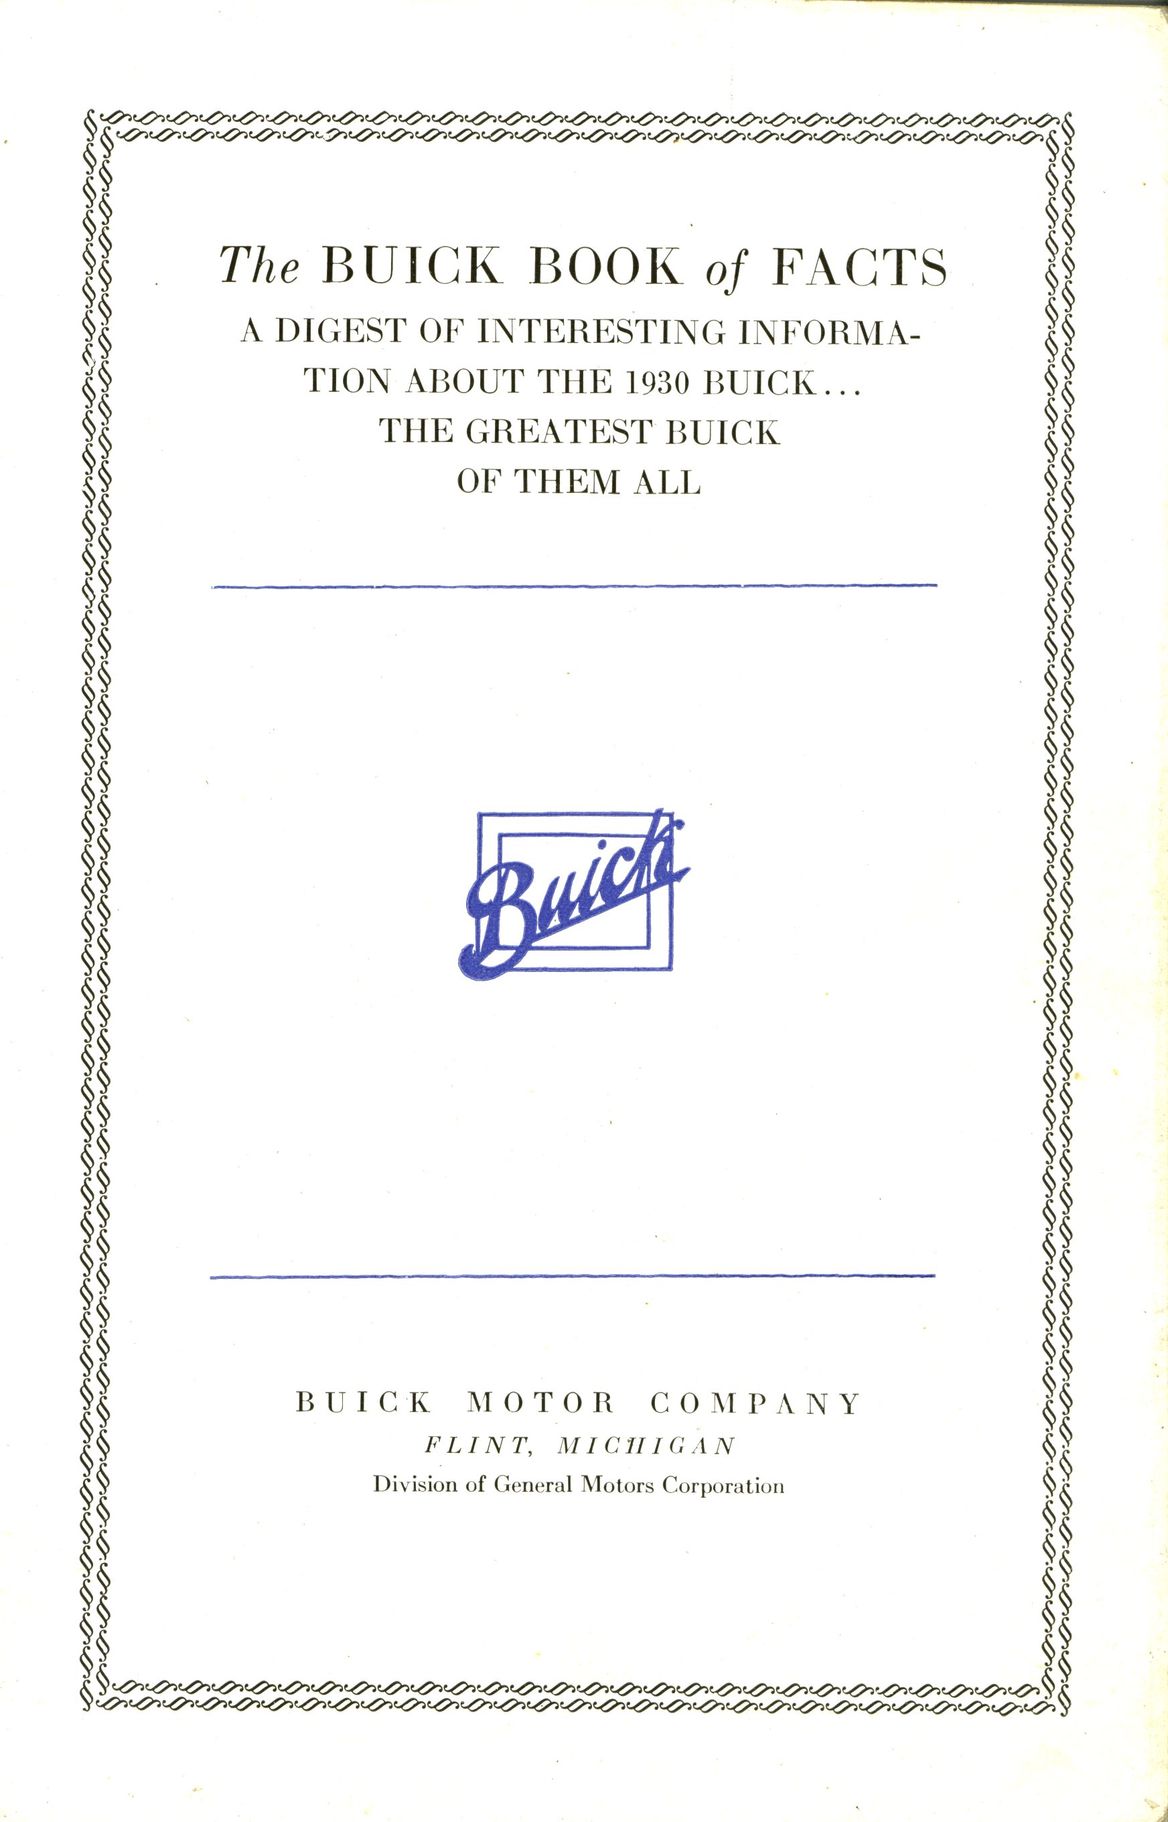 1930 Buick Book of Facts-01